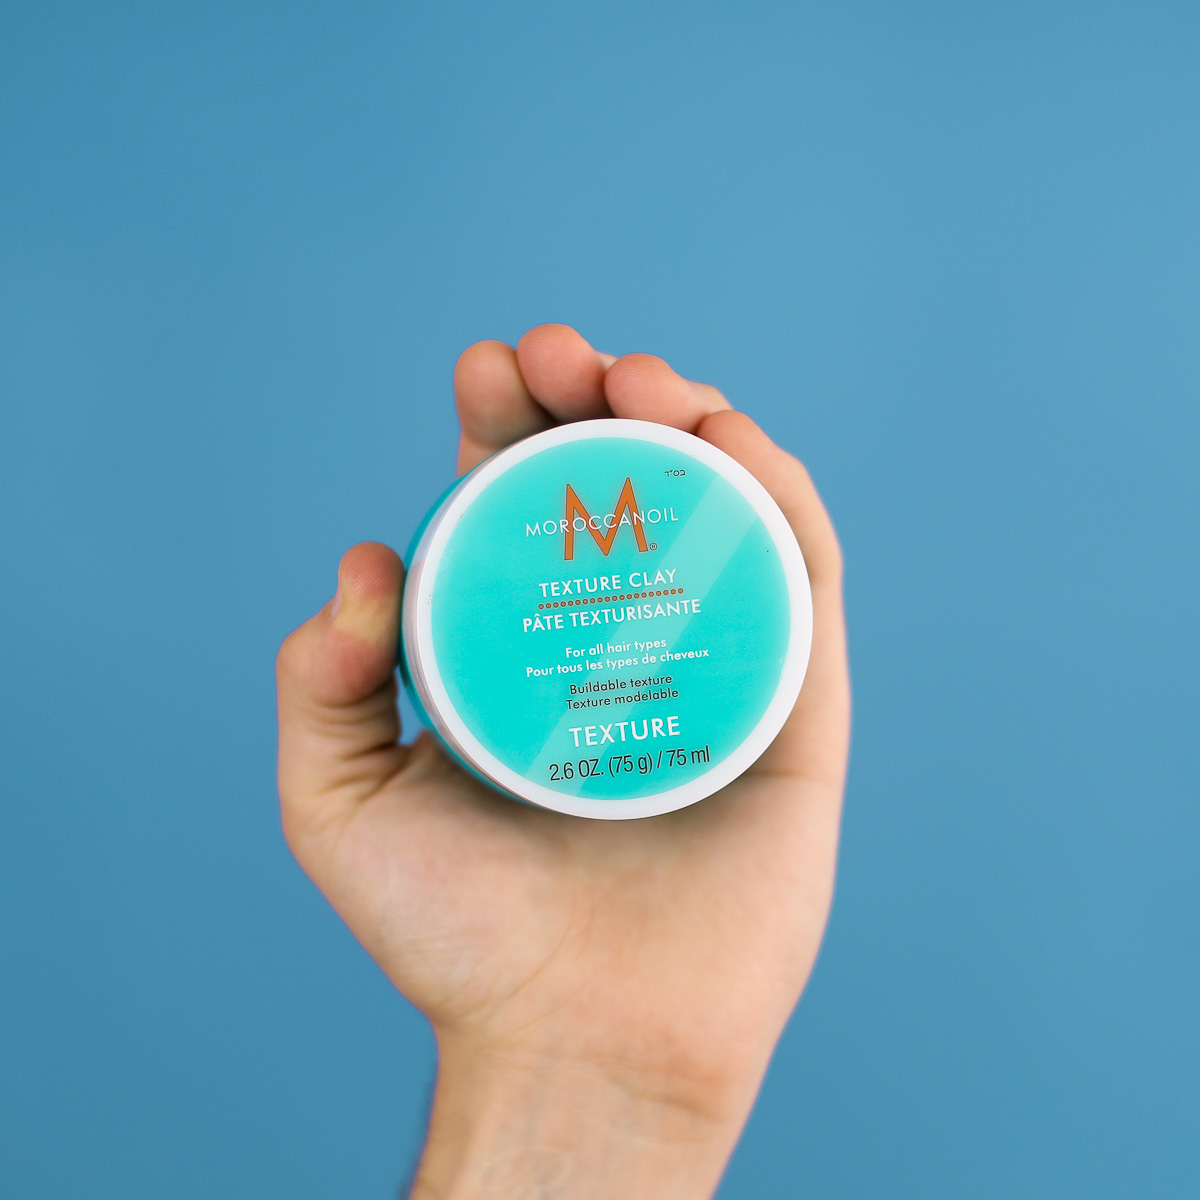 moroccanoil-texture-clay-product-review-man-for-himself